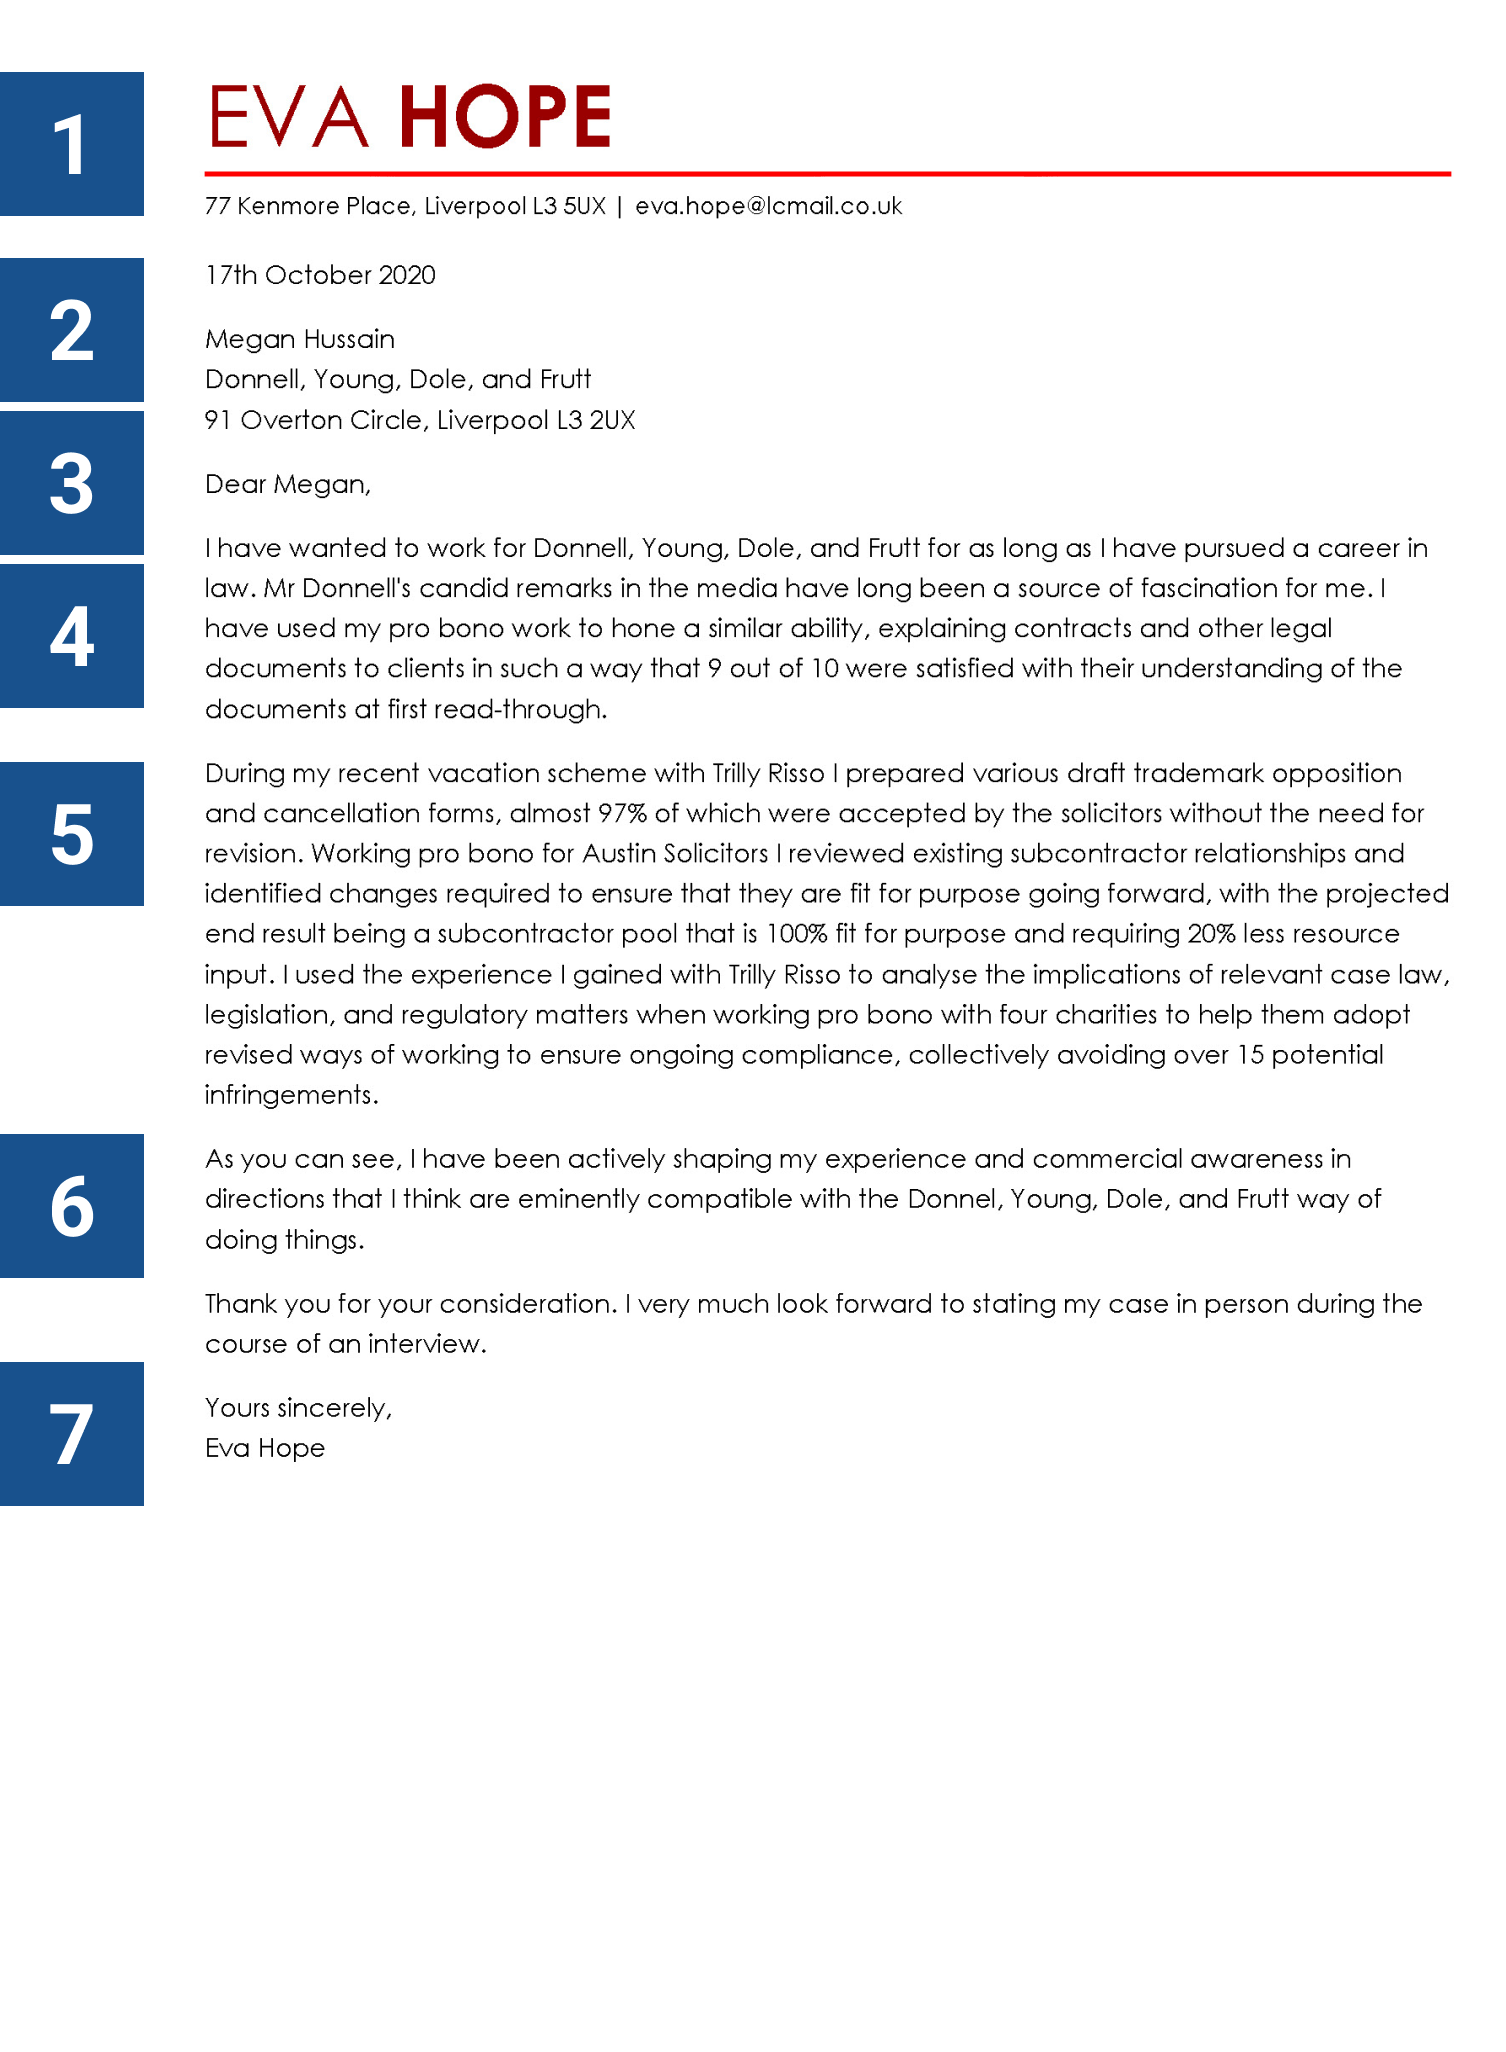 Example of cover letter sections